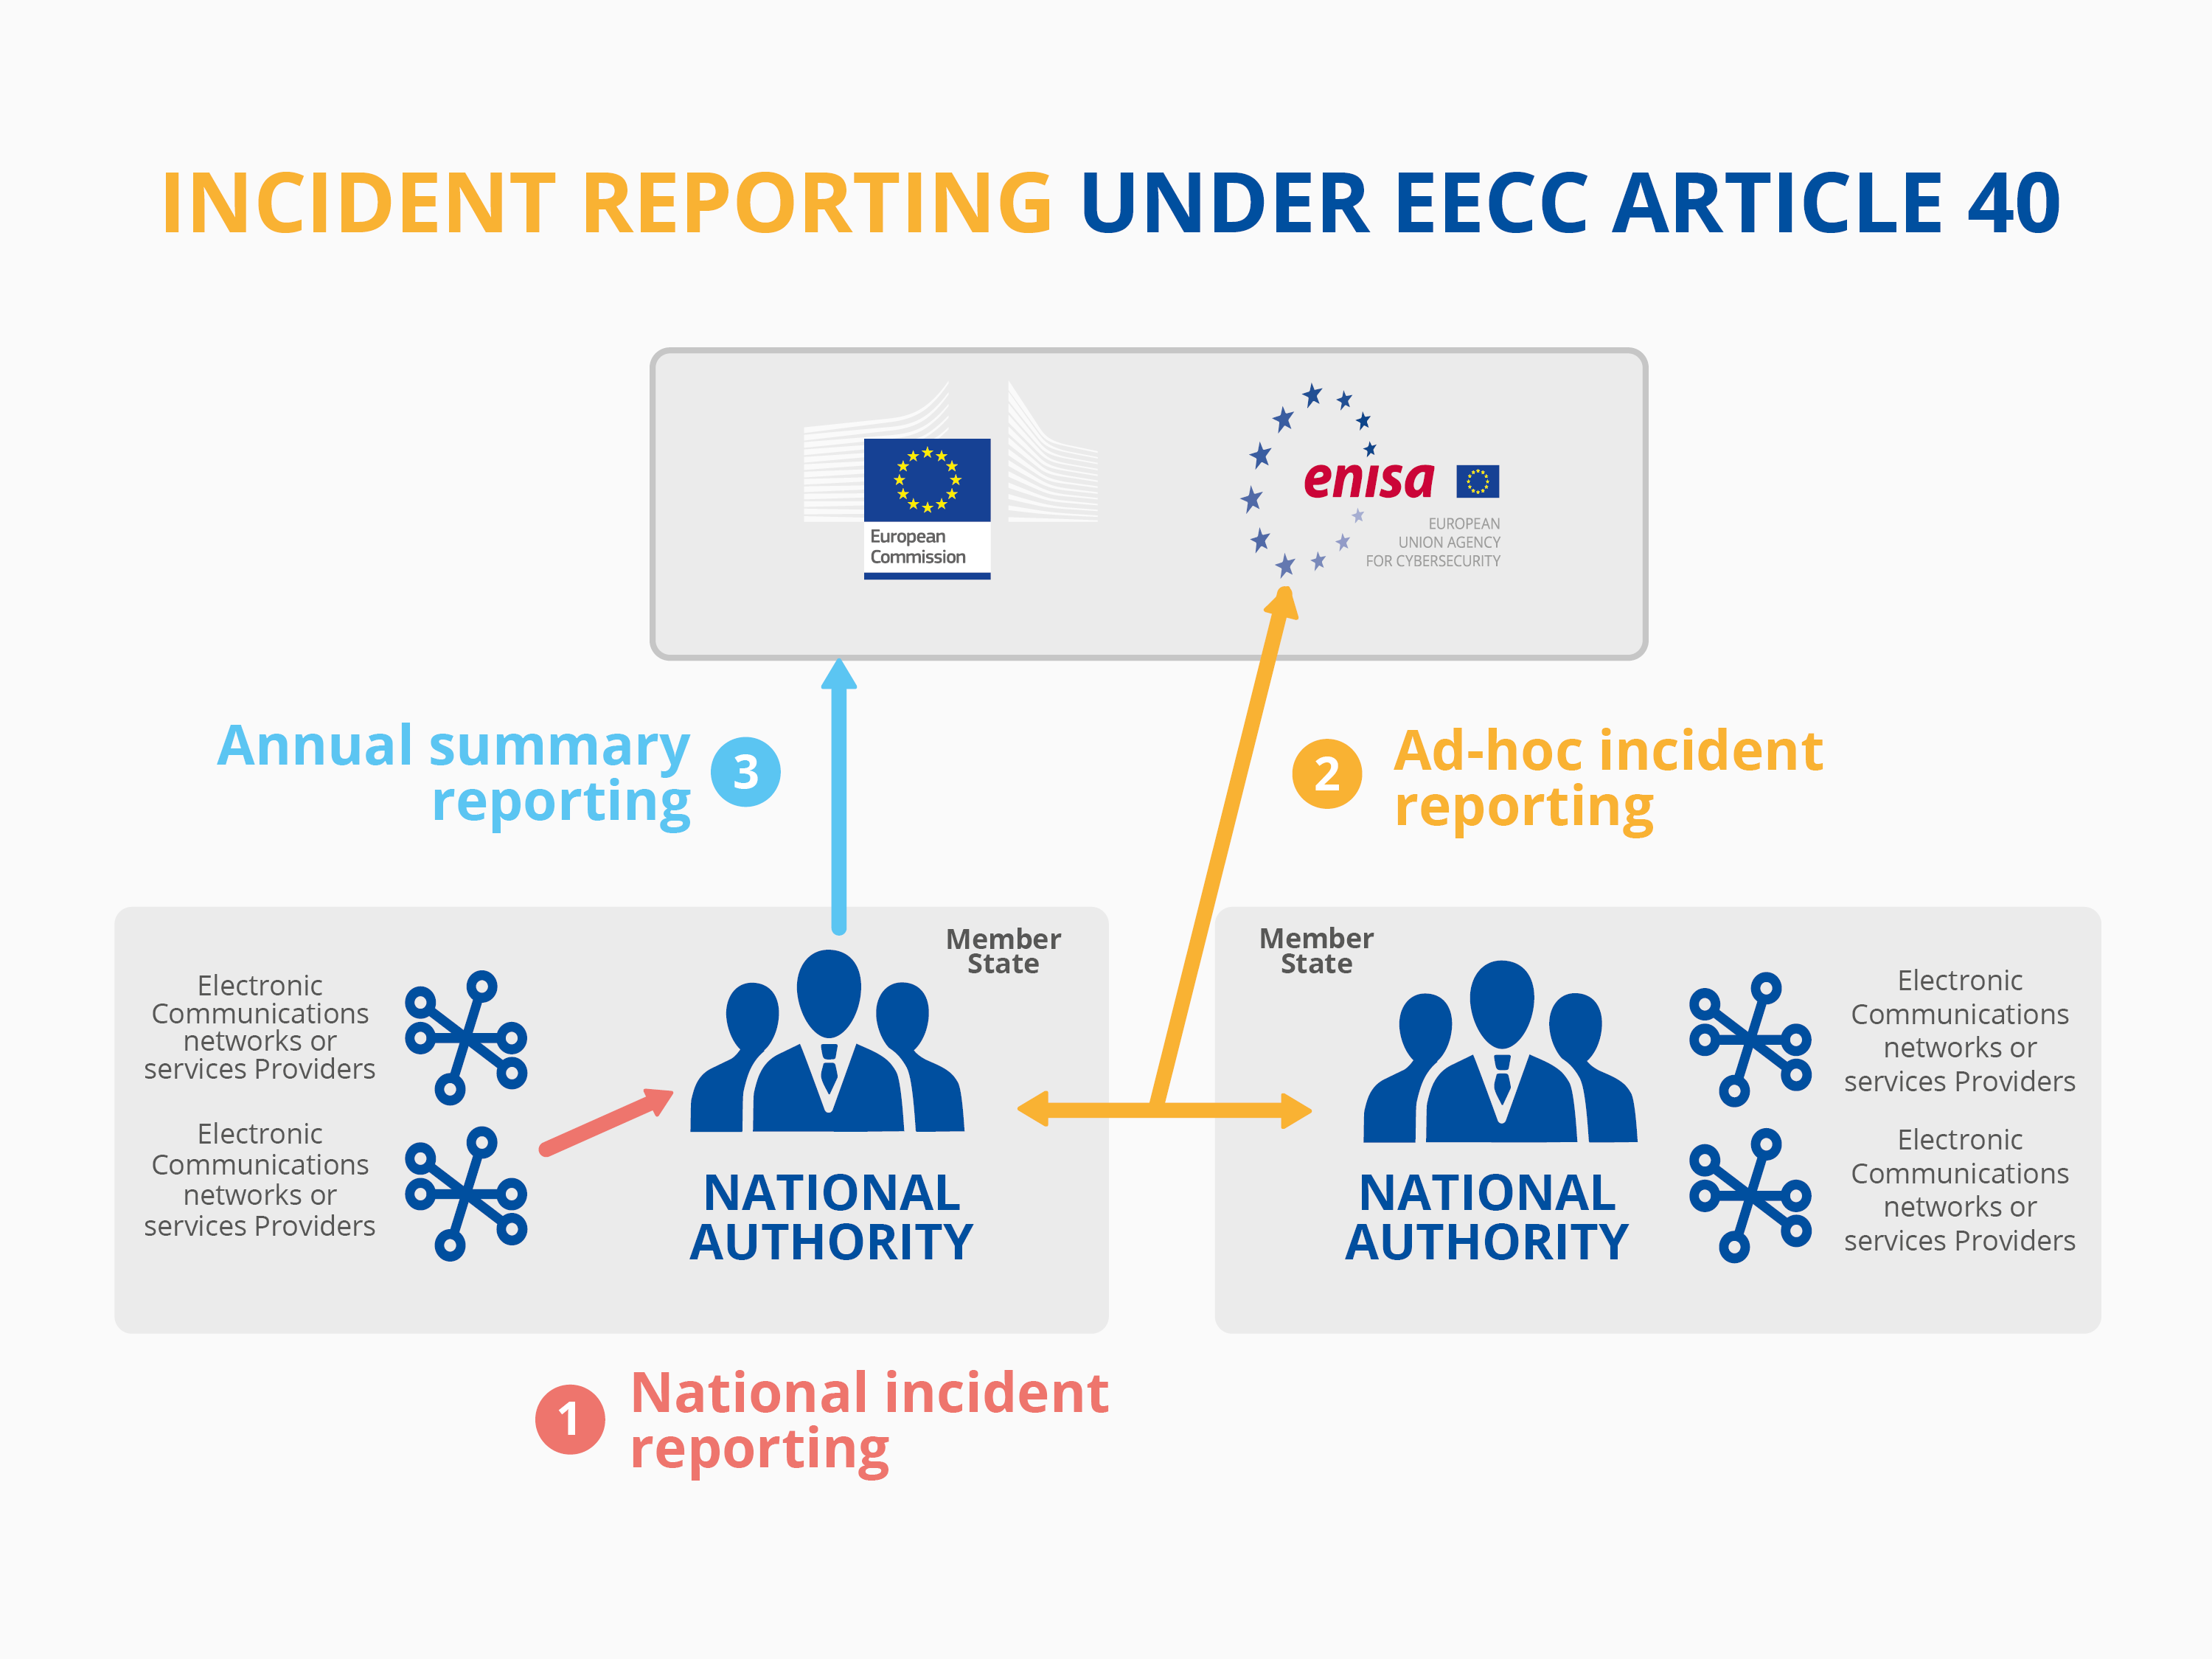 E-Learning on Reporting Security Incidents